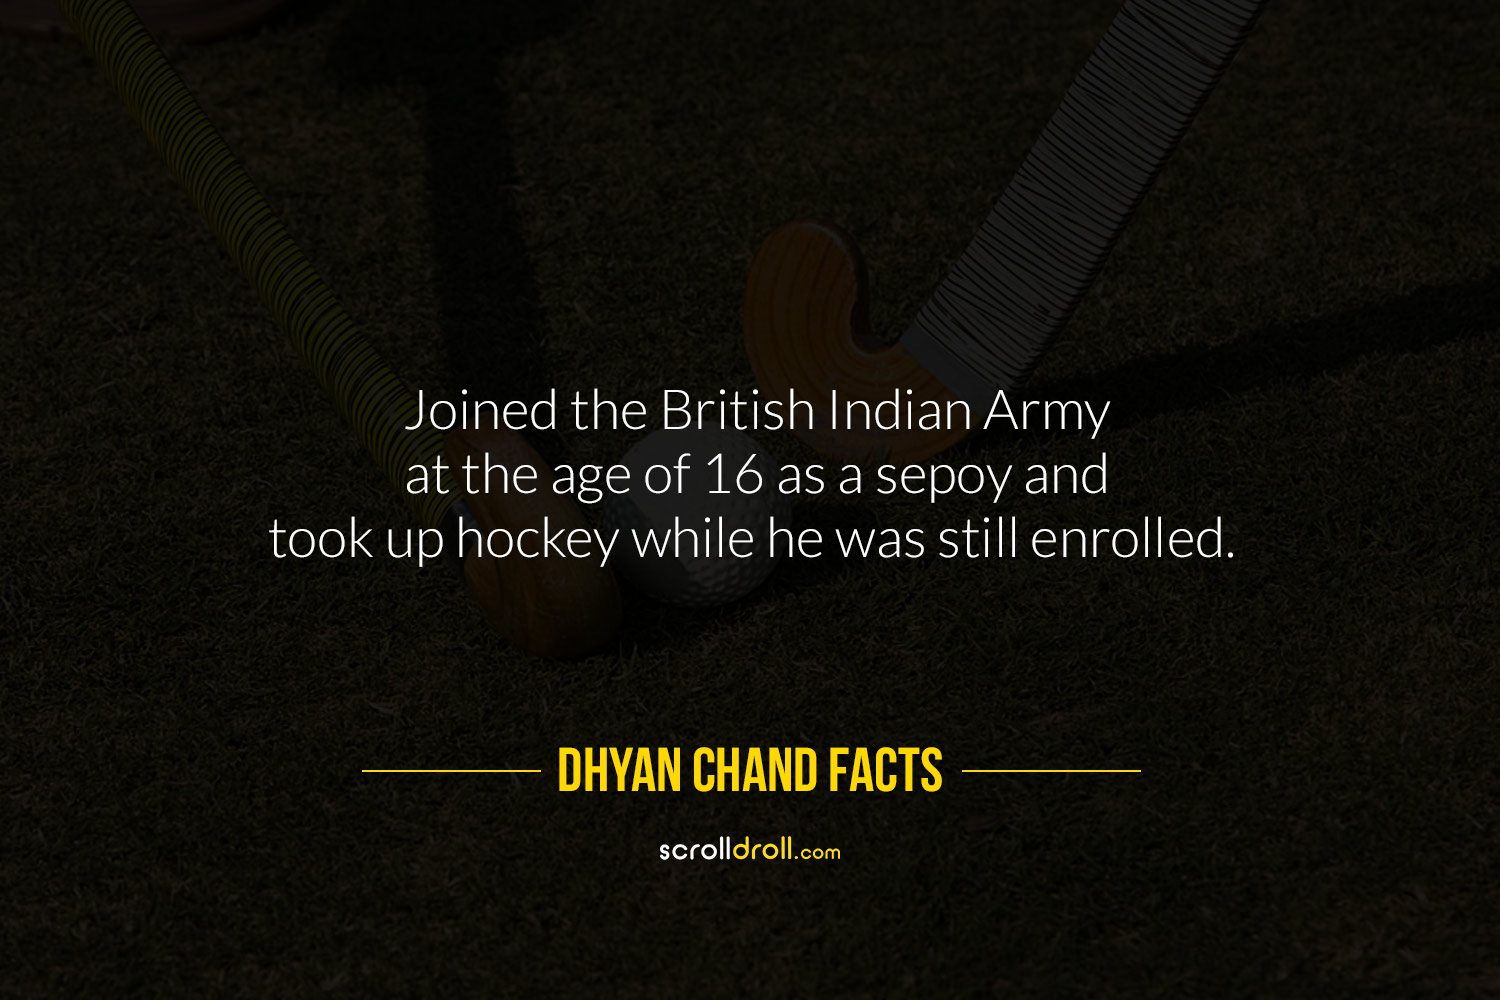 Dhyanchand-Facts-1